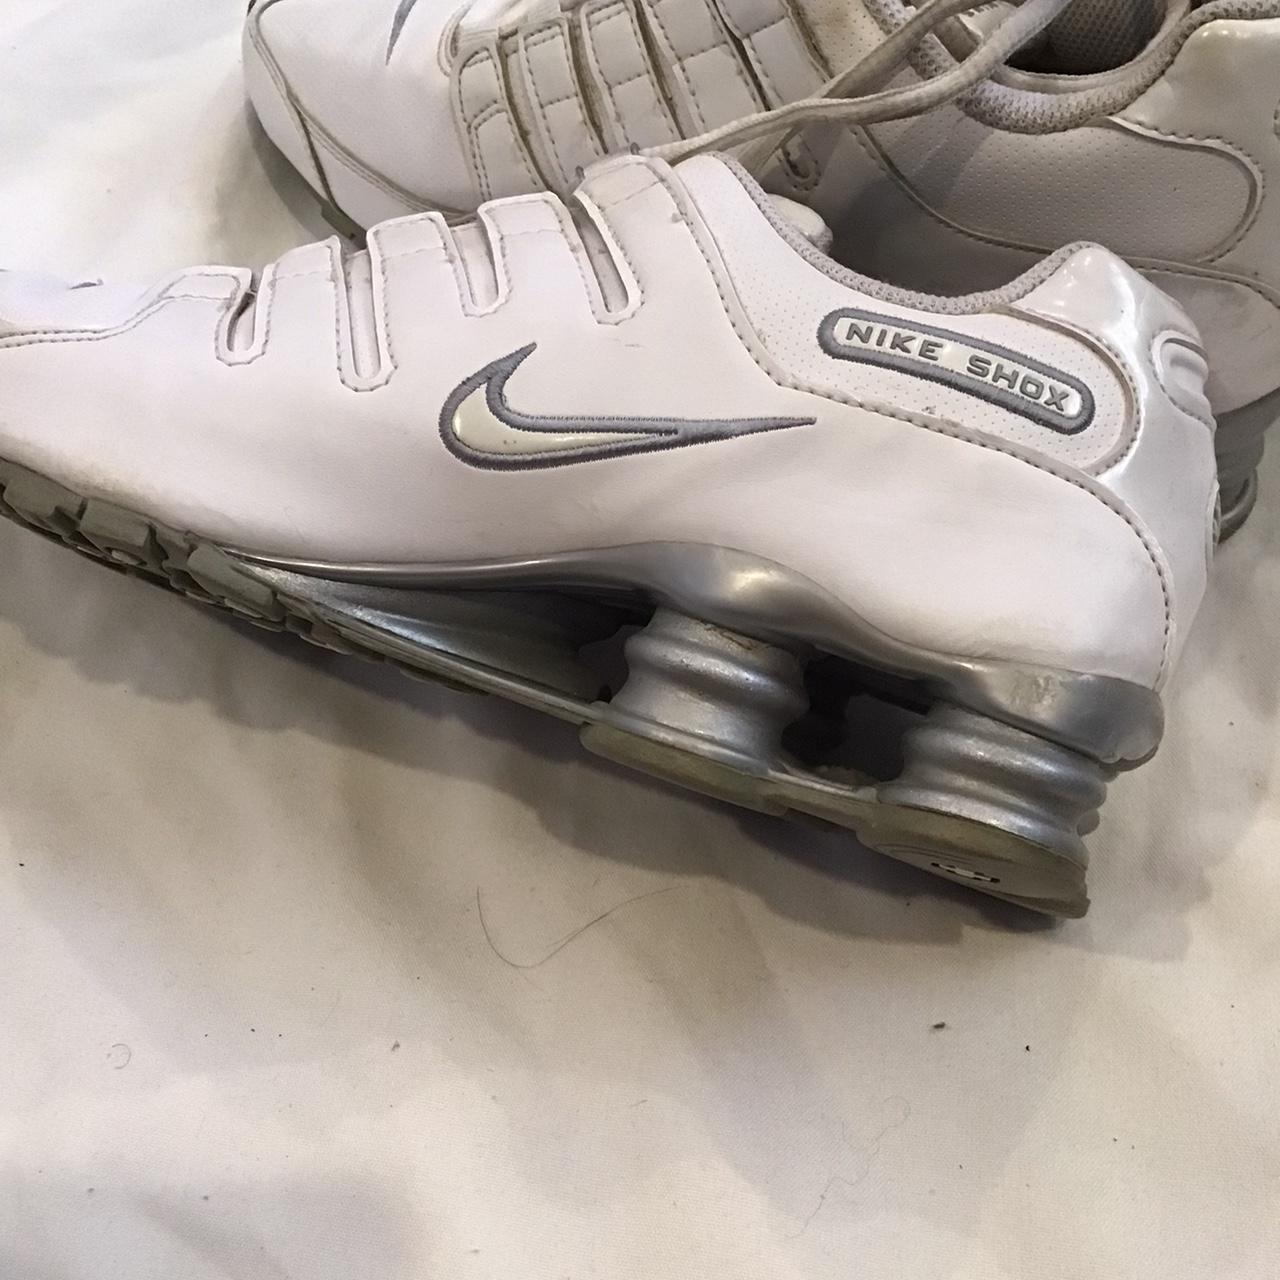 Product Image 4 - Pre-Owned: Nike Shox size 9.5